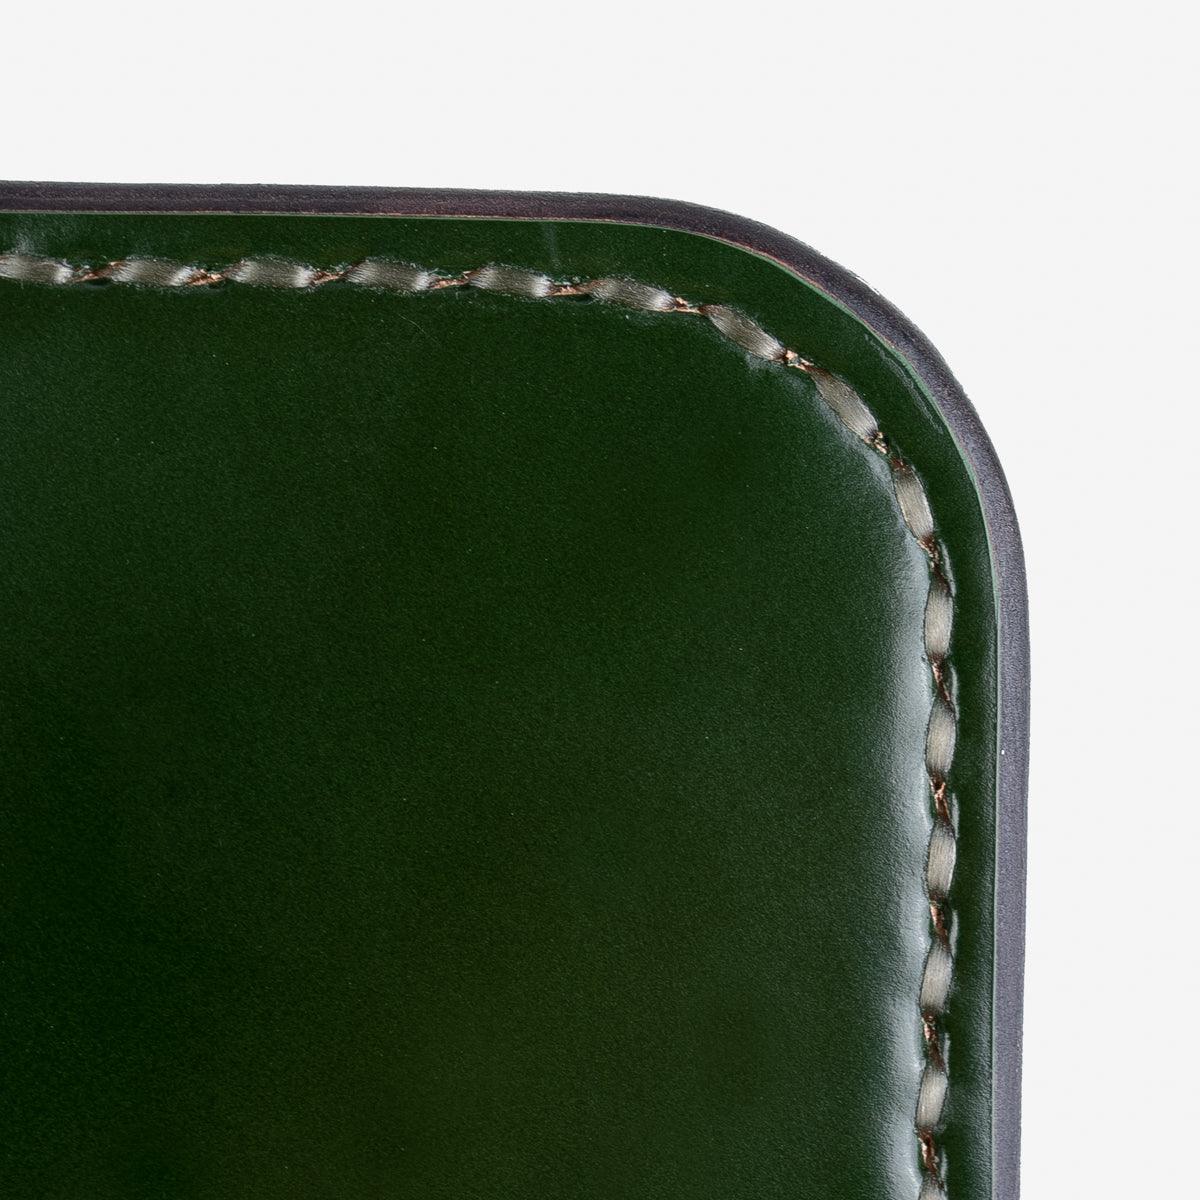 Image showing the IHG-02-GRN - Medium Shell Cordovan Wallet - Green which is a WALLETS AND CHAINS described by the following info Accessories, Iron Heart, Released, WALLETS AND CHAINS and sold on the IRON HEART GERMANY online store